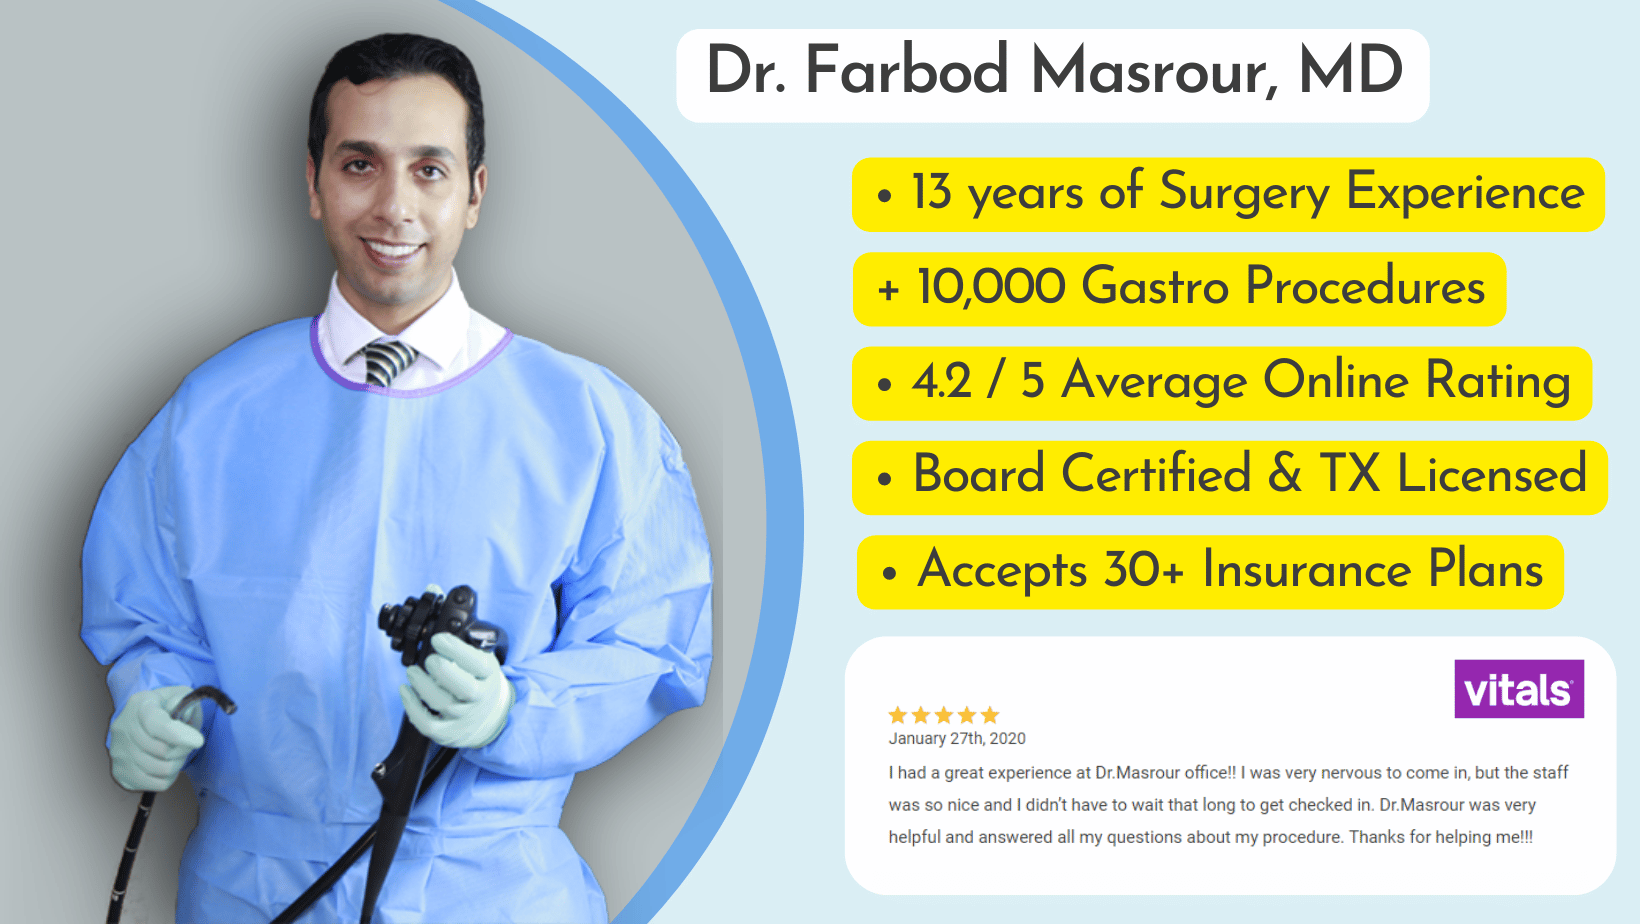 Dr. Farbod Masrour, MD